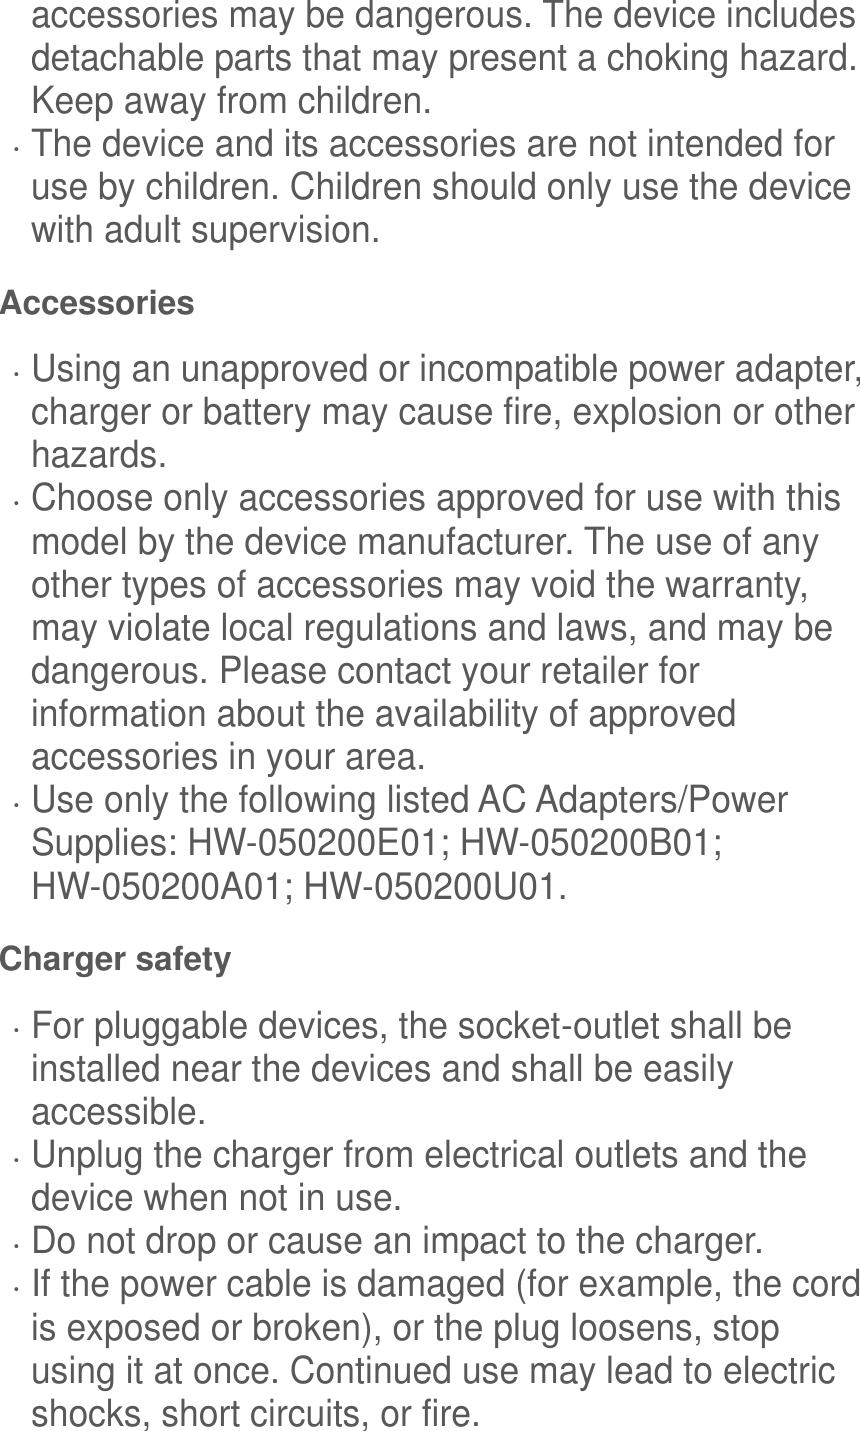  accessories may be dangerous. The device includes detachable parts that may present a choking hazard. Keep away from children.  The device and its accessories are not intended for use by children. Children should only use the device with adult supervision.   Accessories  Using an unapproved or incompatible power adapter, charger or battery may cause fire, explosion or other hazards.    Choose only accessories approved for use with this model by the device manufacturer. The use of any other types of accessories may void the warranty, may violate local regulations and laws, and may be dangerous. Please contact your retailer for information about the availability of approved accessories in your area.  Use only the following listed AC Adapters/Power Supplies: HW-050200E01; HW-050200B01; HW-050200A01; HW-050200U01. Charger safety  For pluggable devices, the socket-outlet shall be installed near the devices and shall be easily accessible.  Unplug the charger from electrical outlets and the device when not in use.  Do not drop or cause an impact to the charger.  If the power cable is damaged (for example, the cord is exposed or broken), or the plug loosens, stop using it at once. Continued use may lead to electric shocks, short circuits, or fire. 